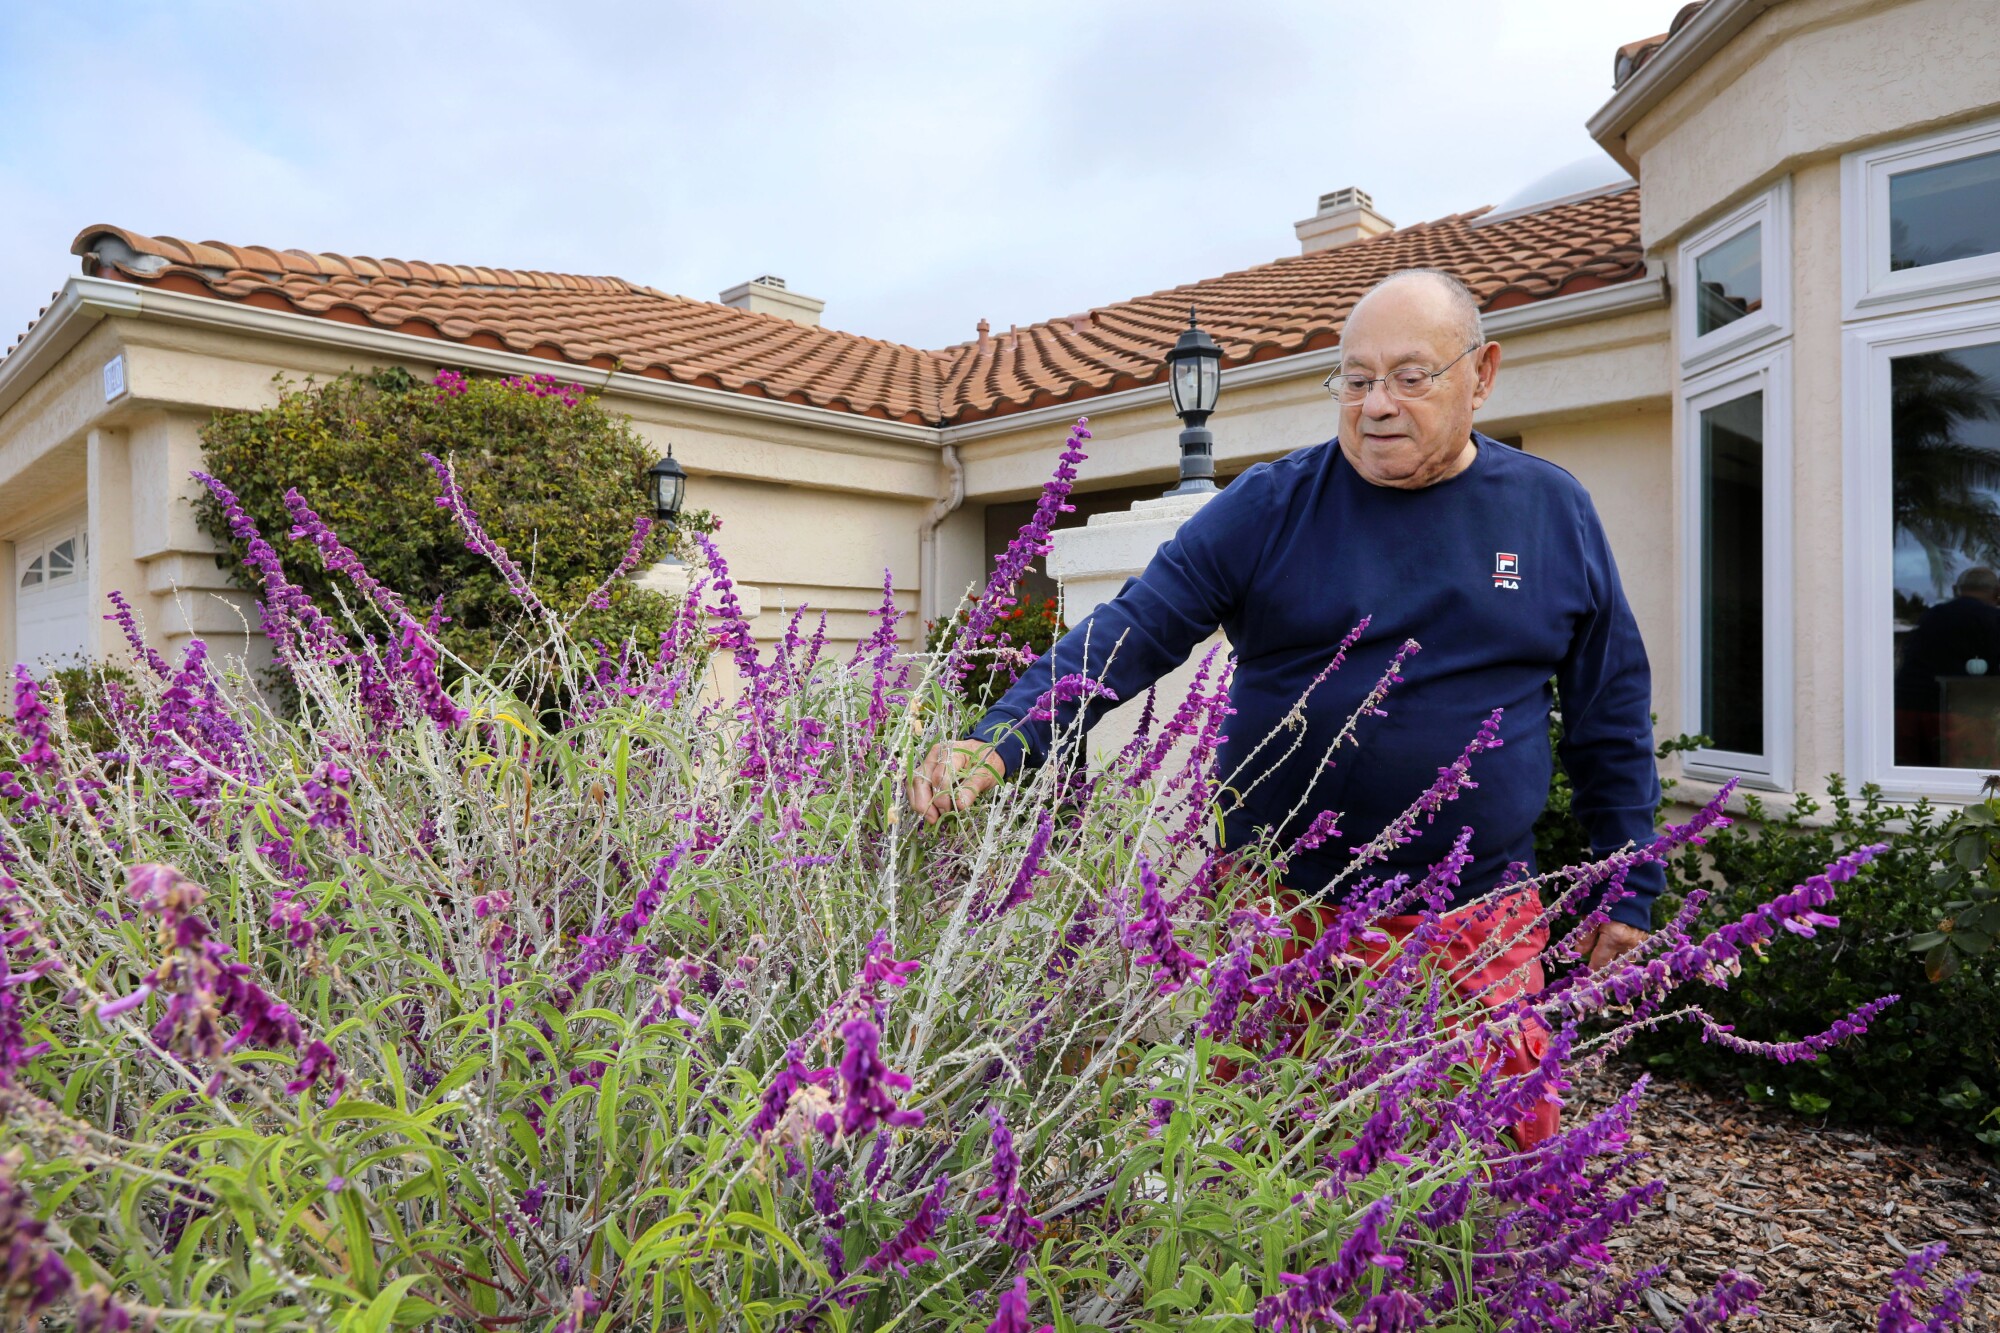 Homeowner Richard Jaross stands in his drought tolerant front yard